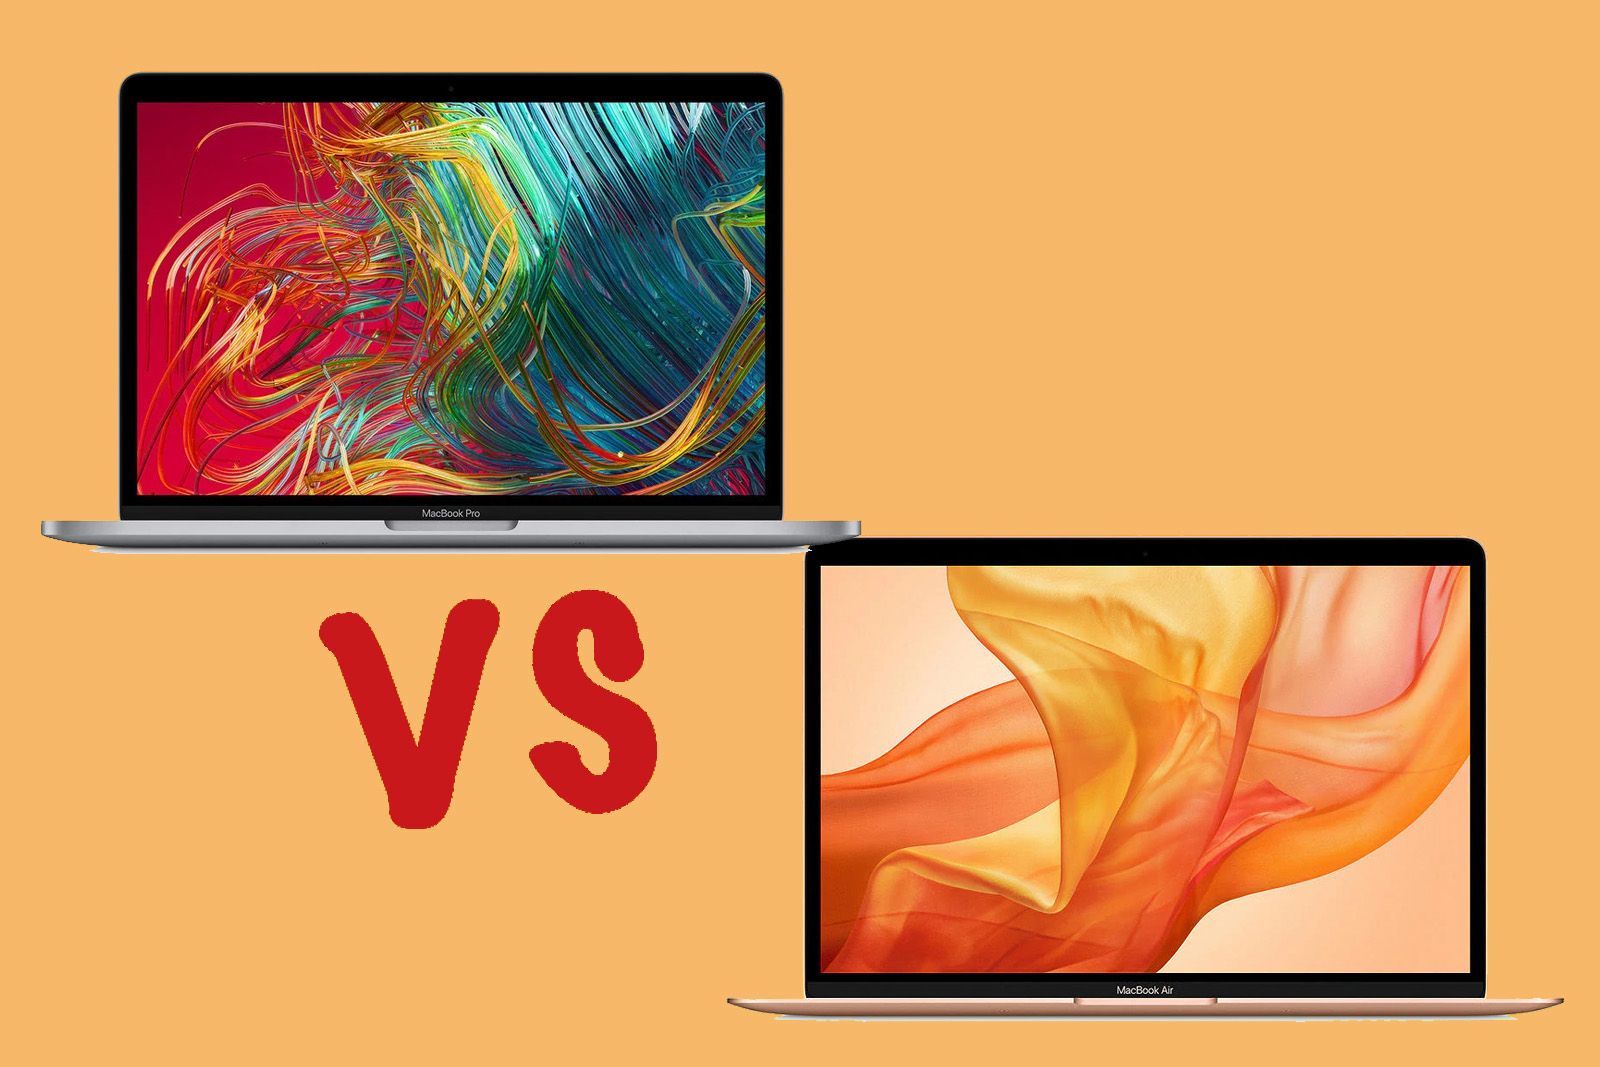 Intel MacBook Pro 13-inch vs Intel MacBook Air: What's the difference between these Apple laptops? photo 1